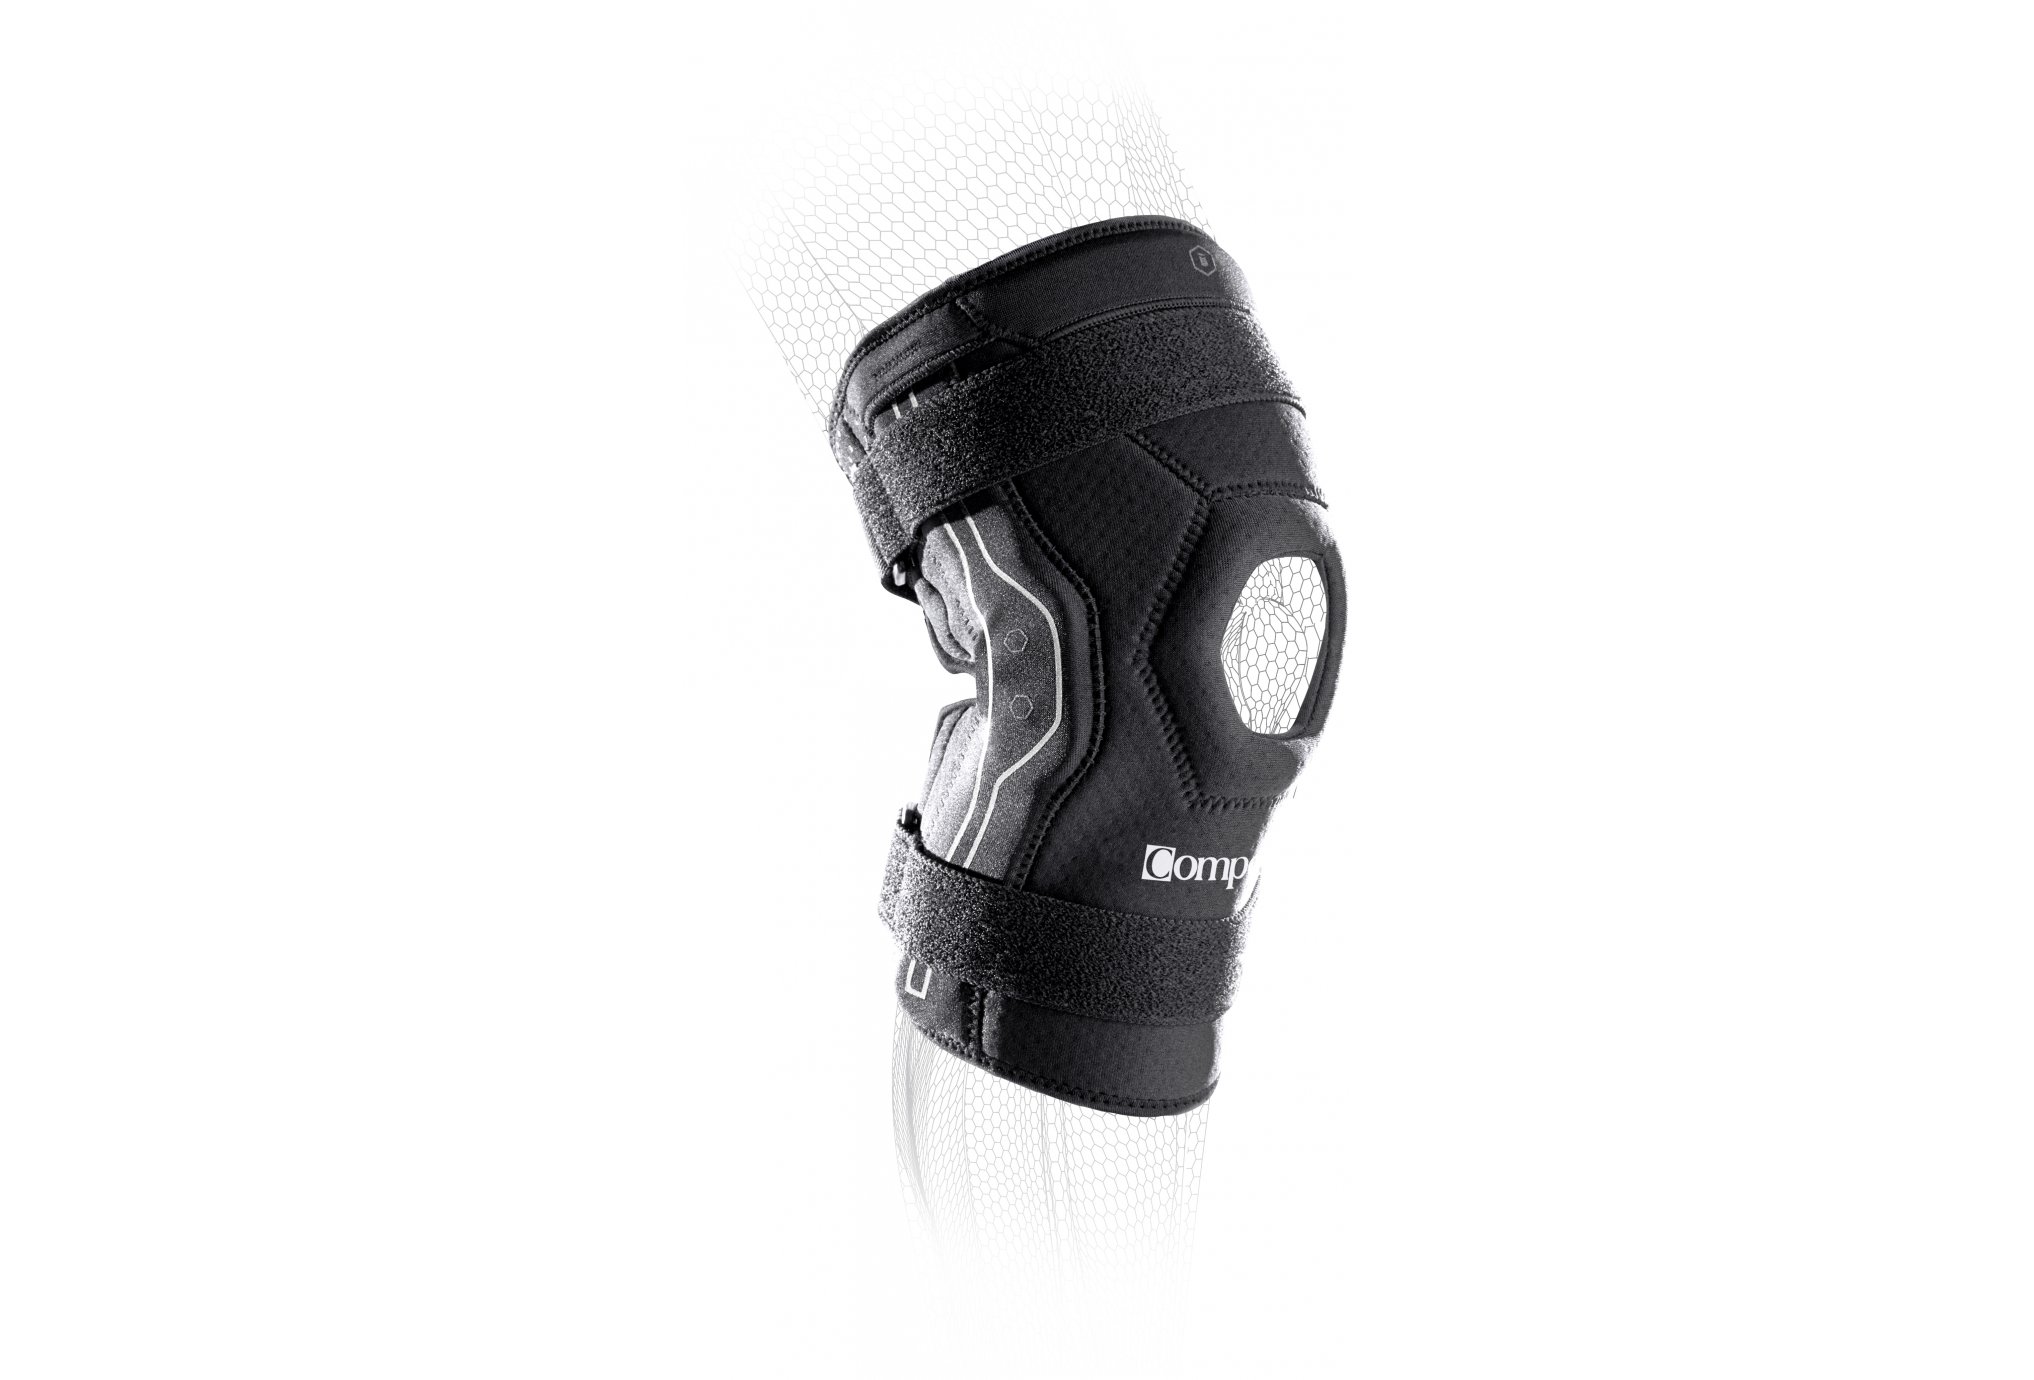 Compex Bionic Knee Protection musculaire & articulaire